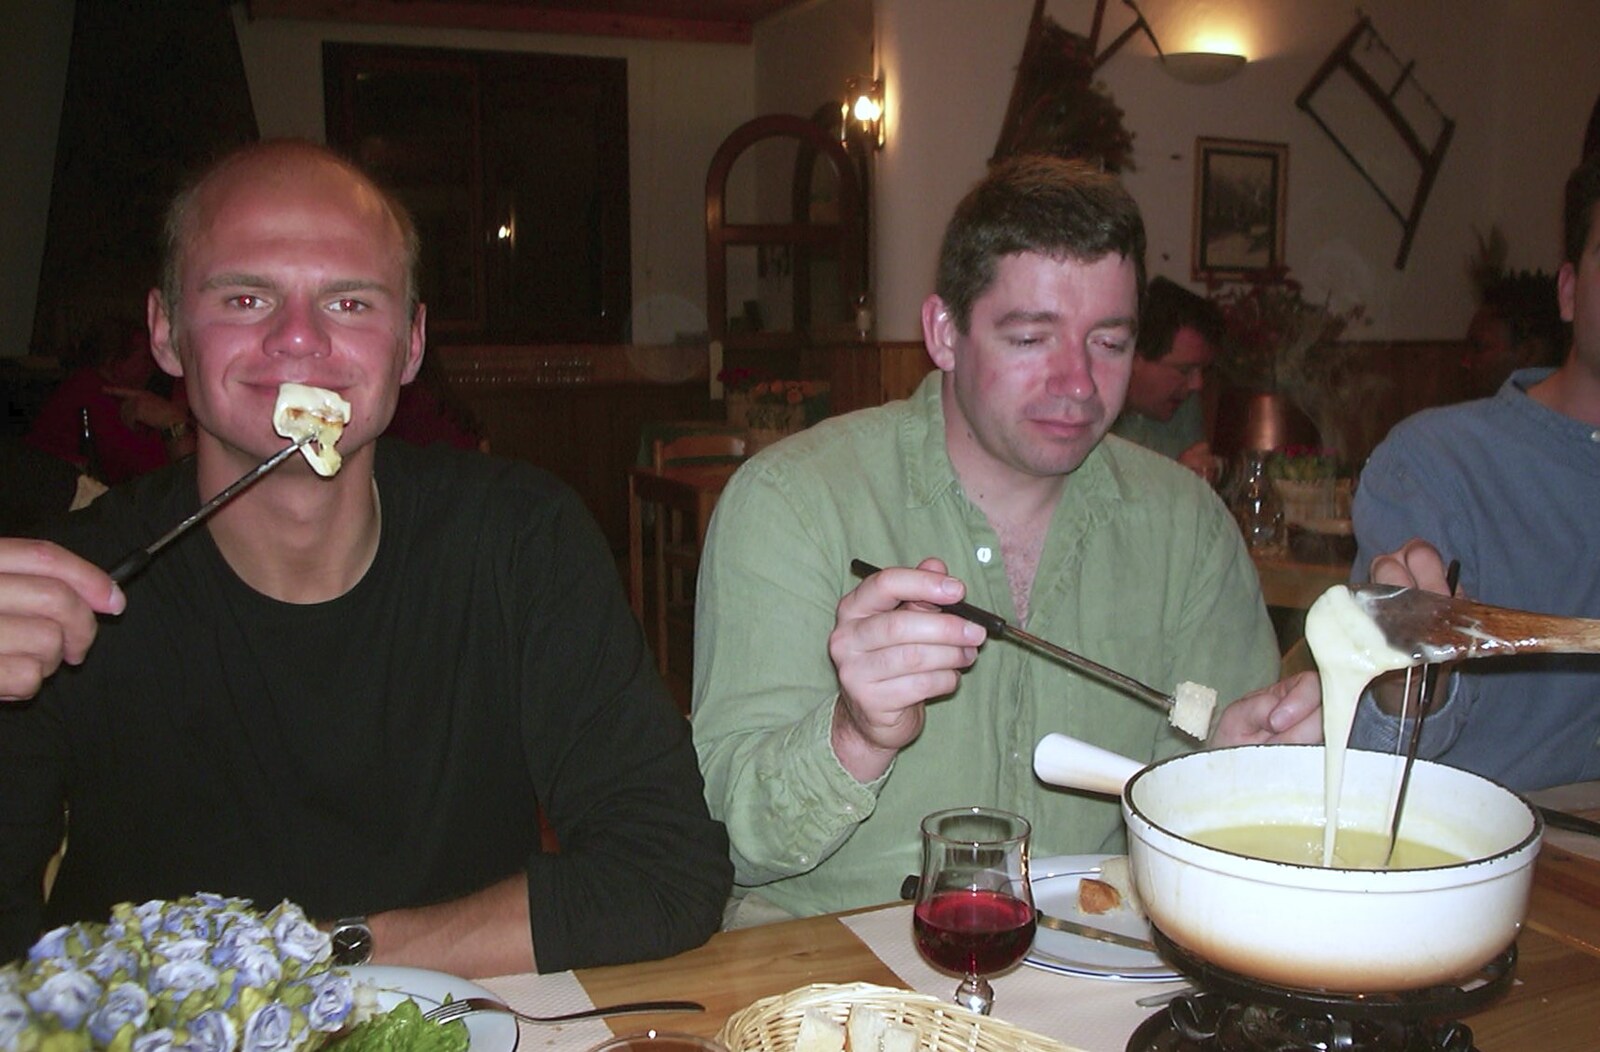 Rob Kurowski holds up bread and molten cheese from 3G Lab Goes Skiing In Chamonix, France - 12th March 2002